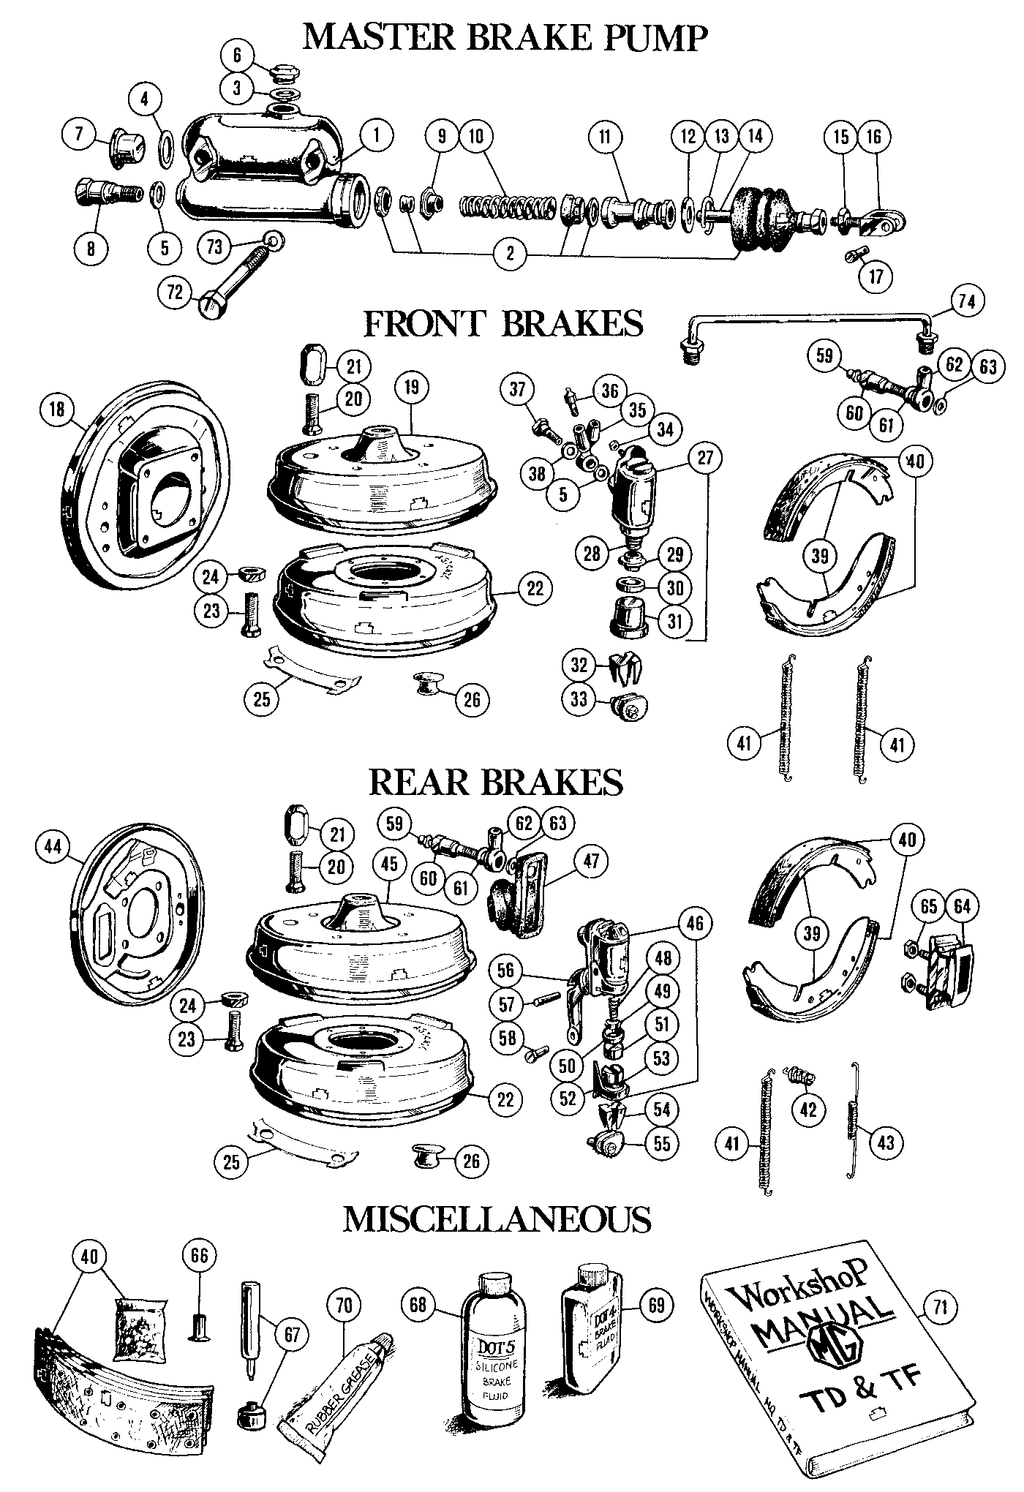 MGTD-TF 1949-1955 - Wheel cylinders | Webshop Anglo Parts - Brakes - 1